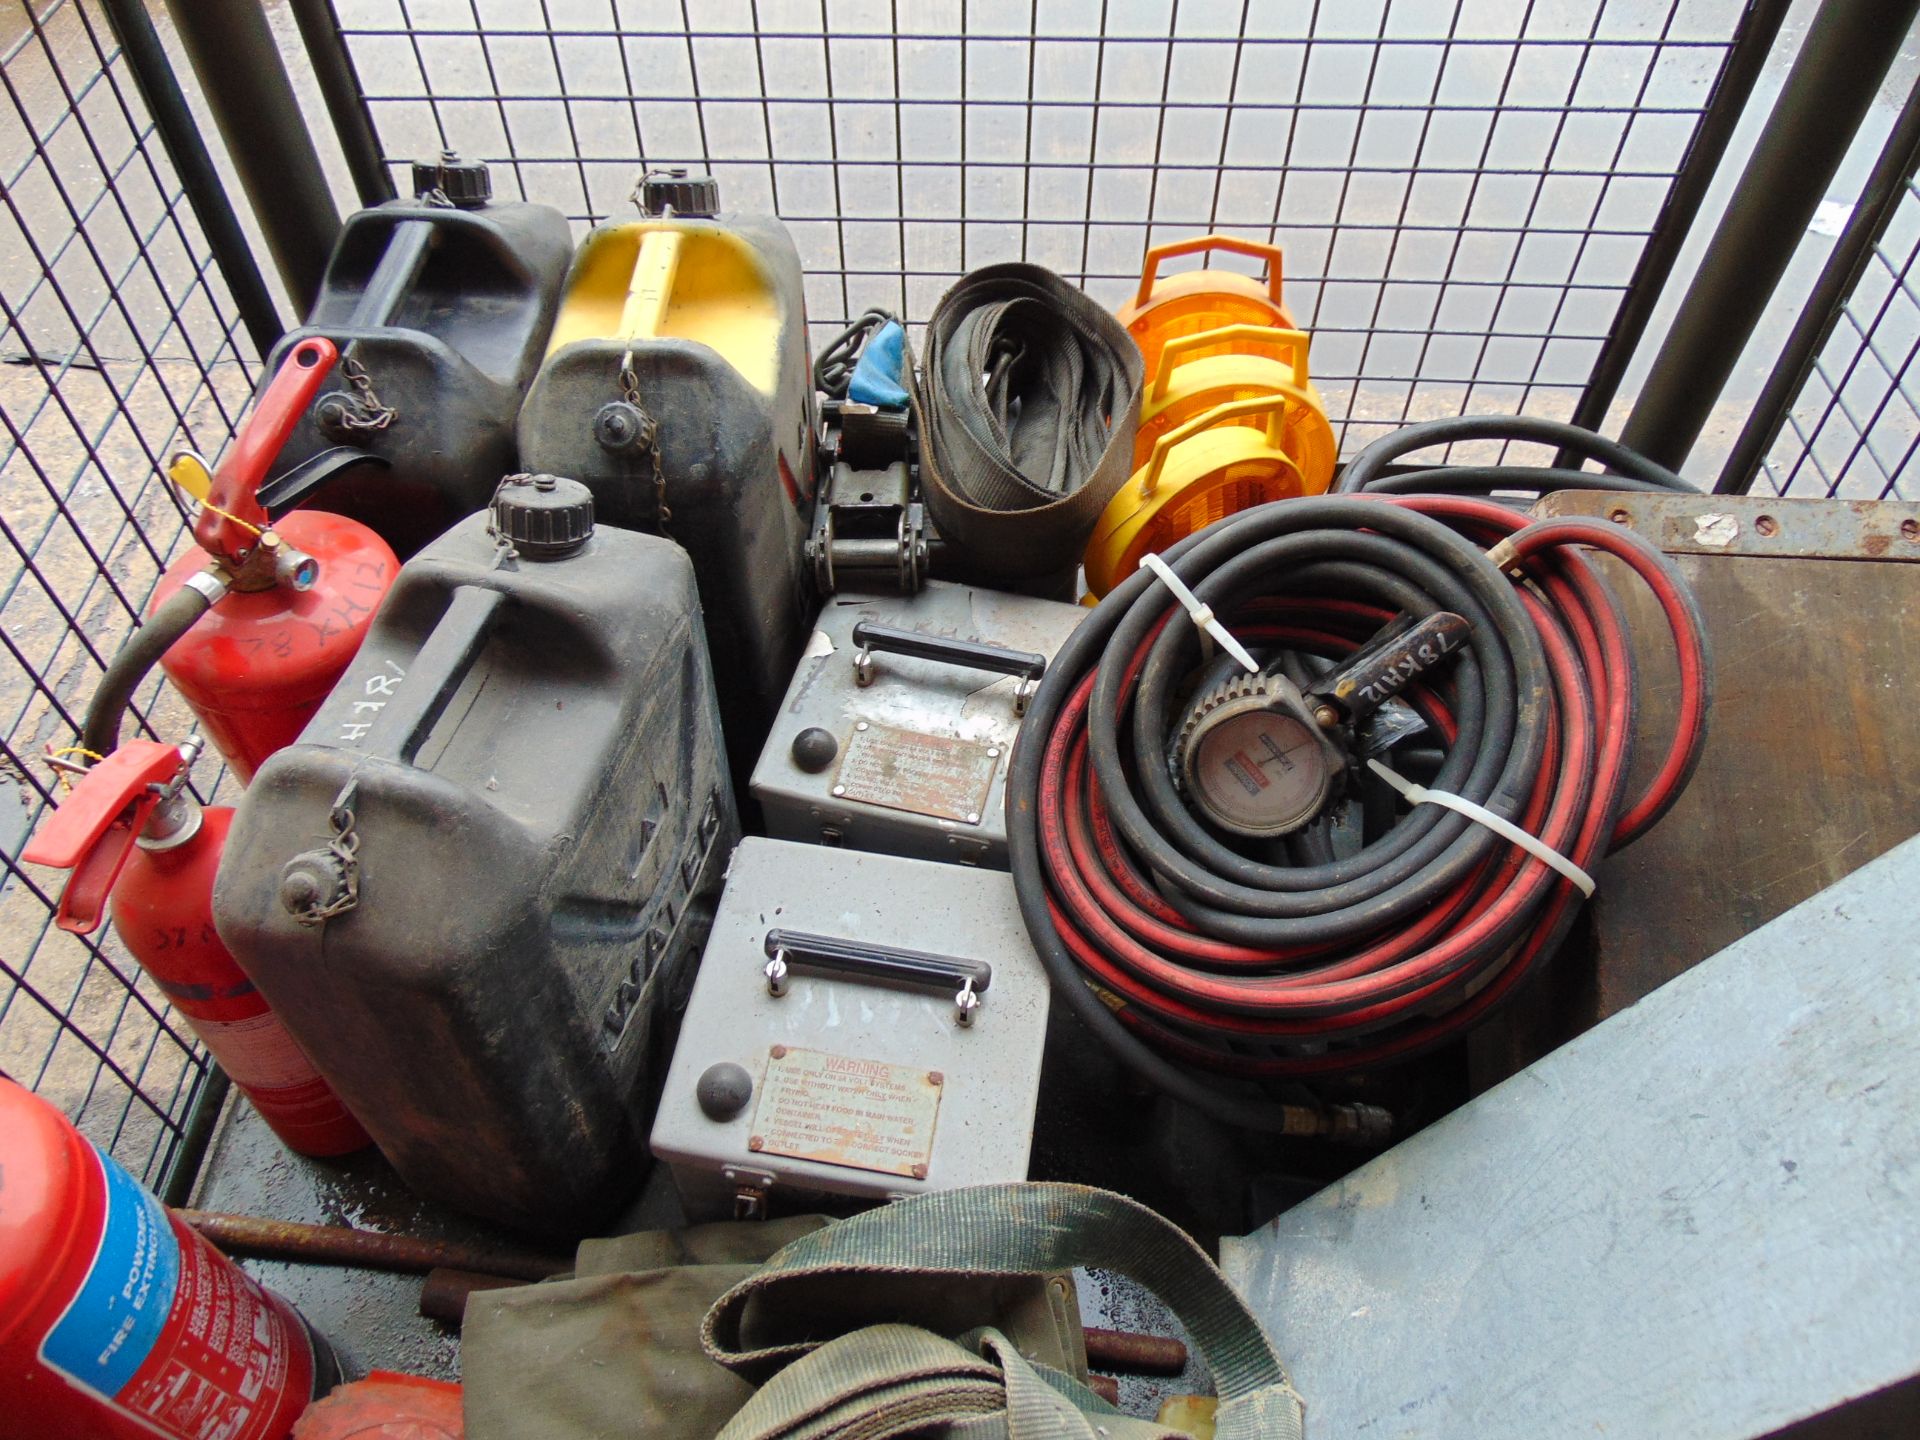 1 x Stillage Air Lines Wheel Chocks, Jerry Cans, Cooking Vessels, Ratchet Straps, Fire Extinguisher